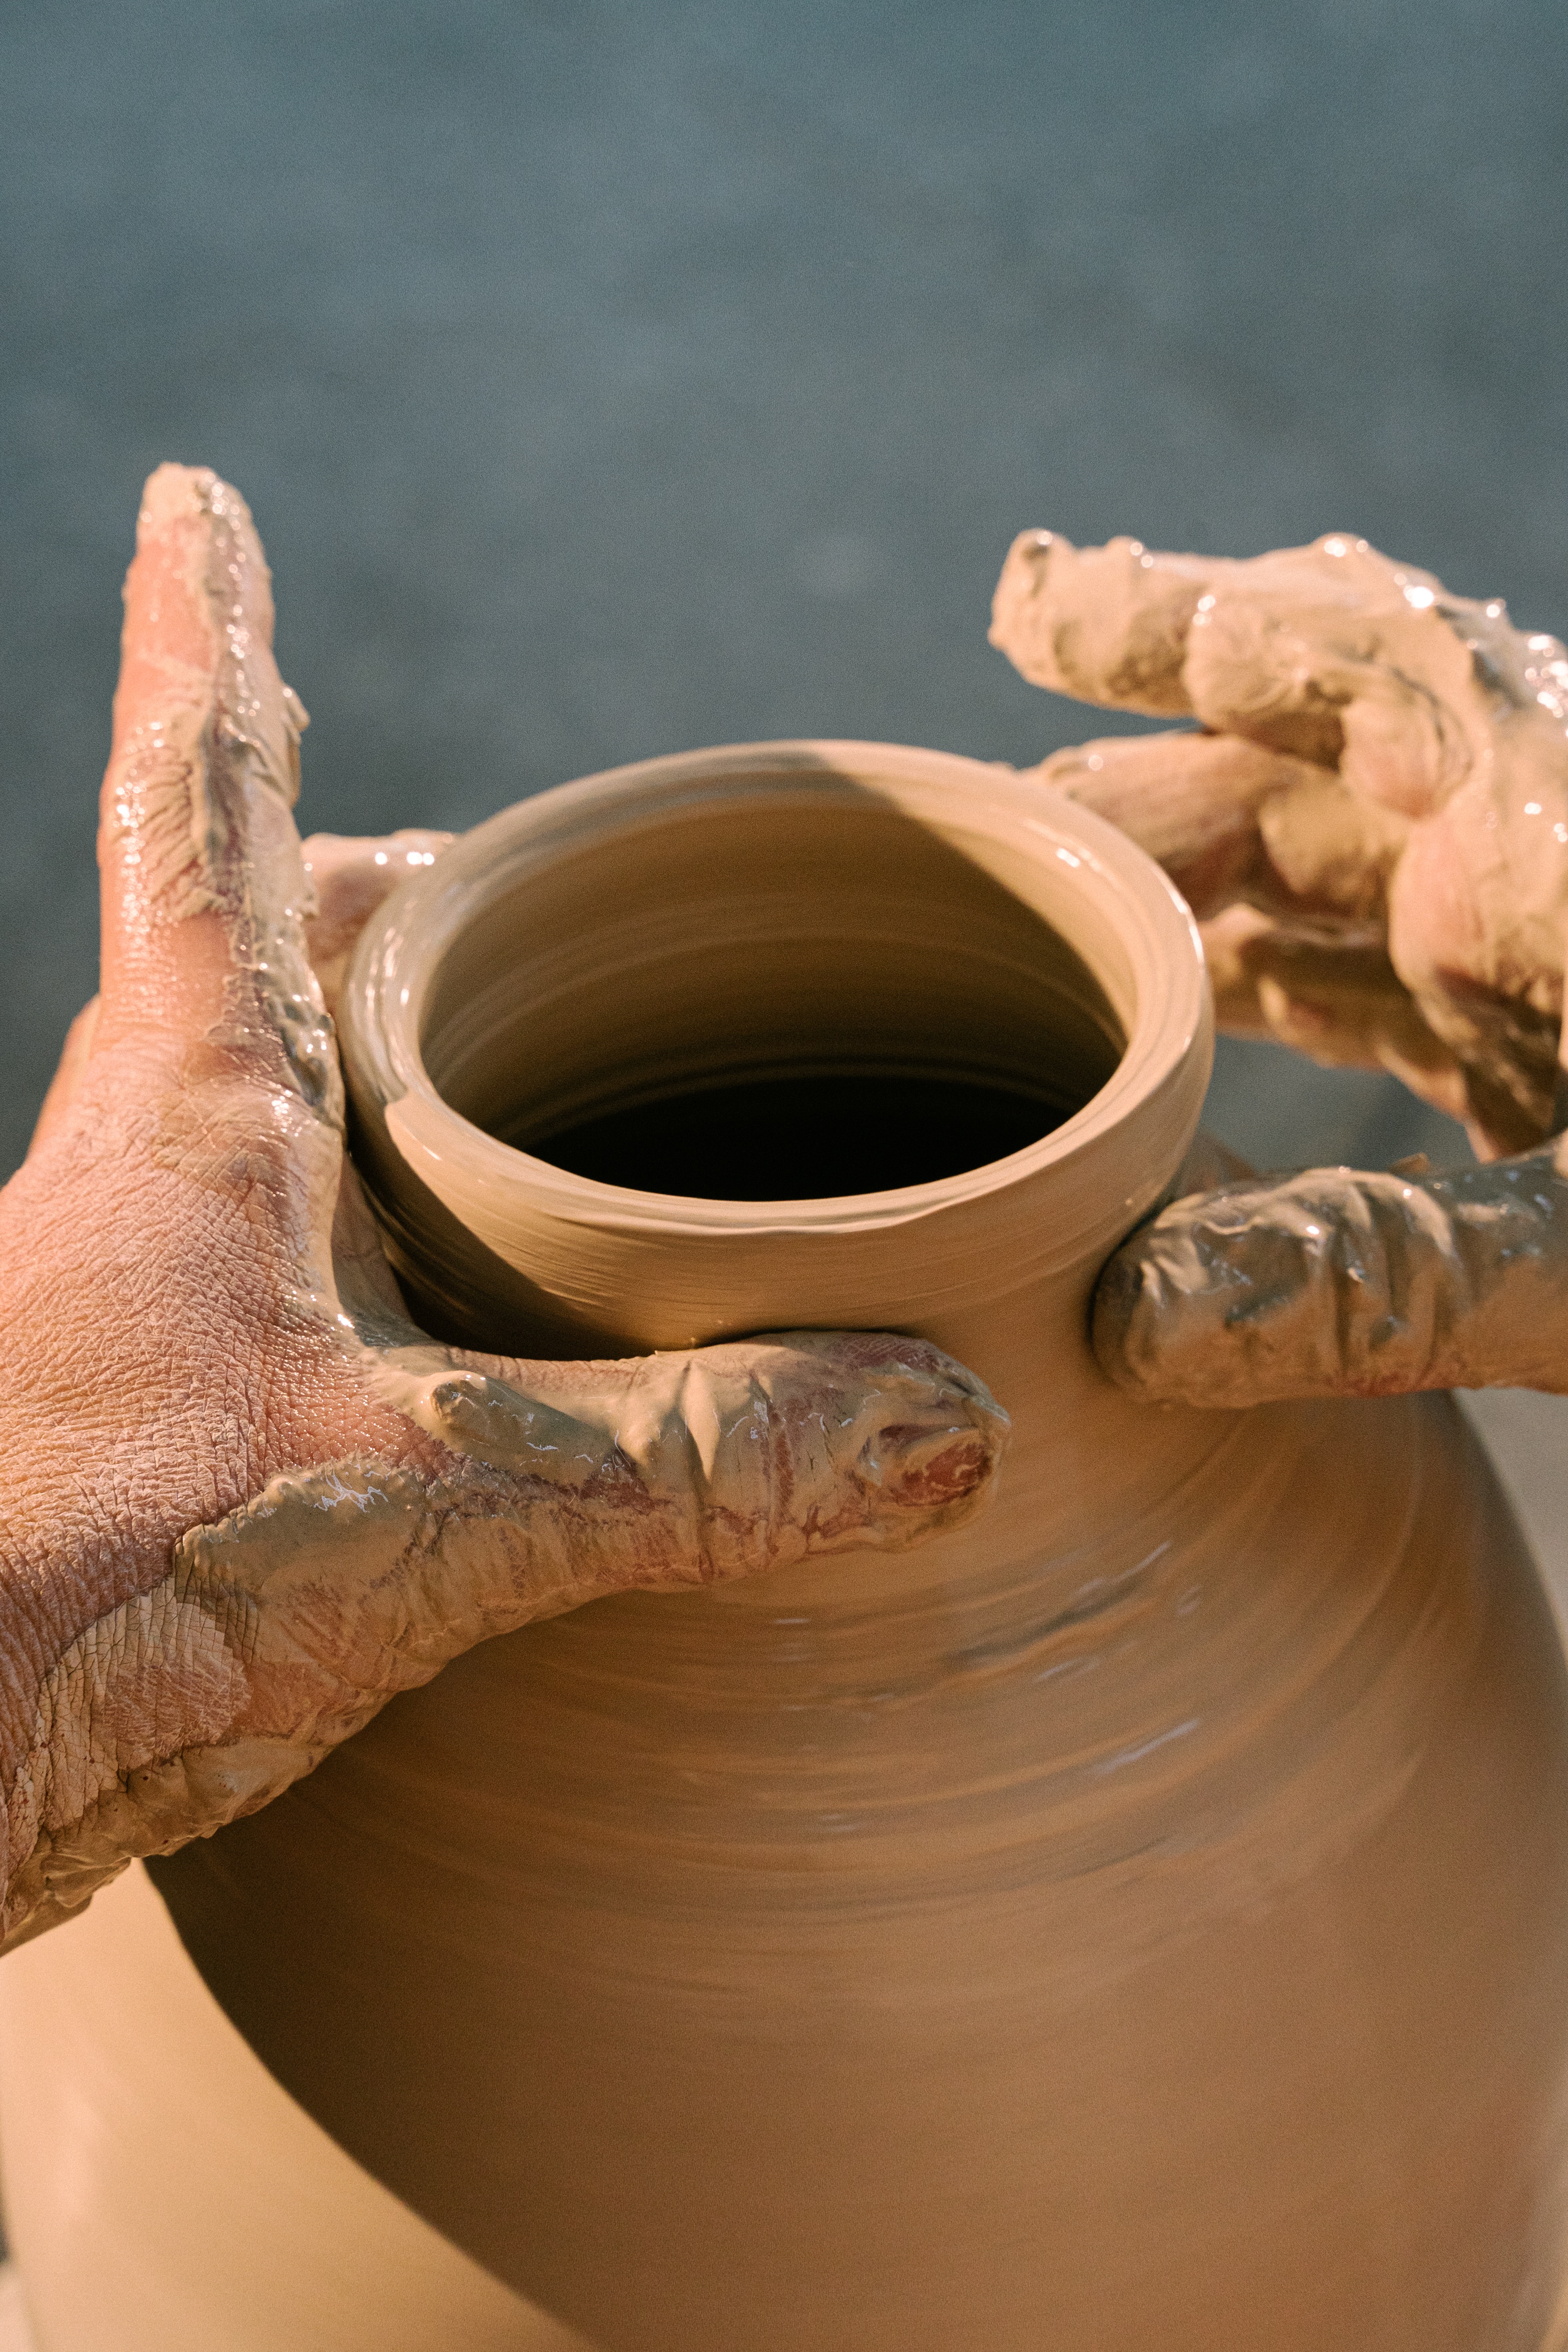 hands doing pottery with a clay pot